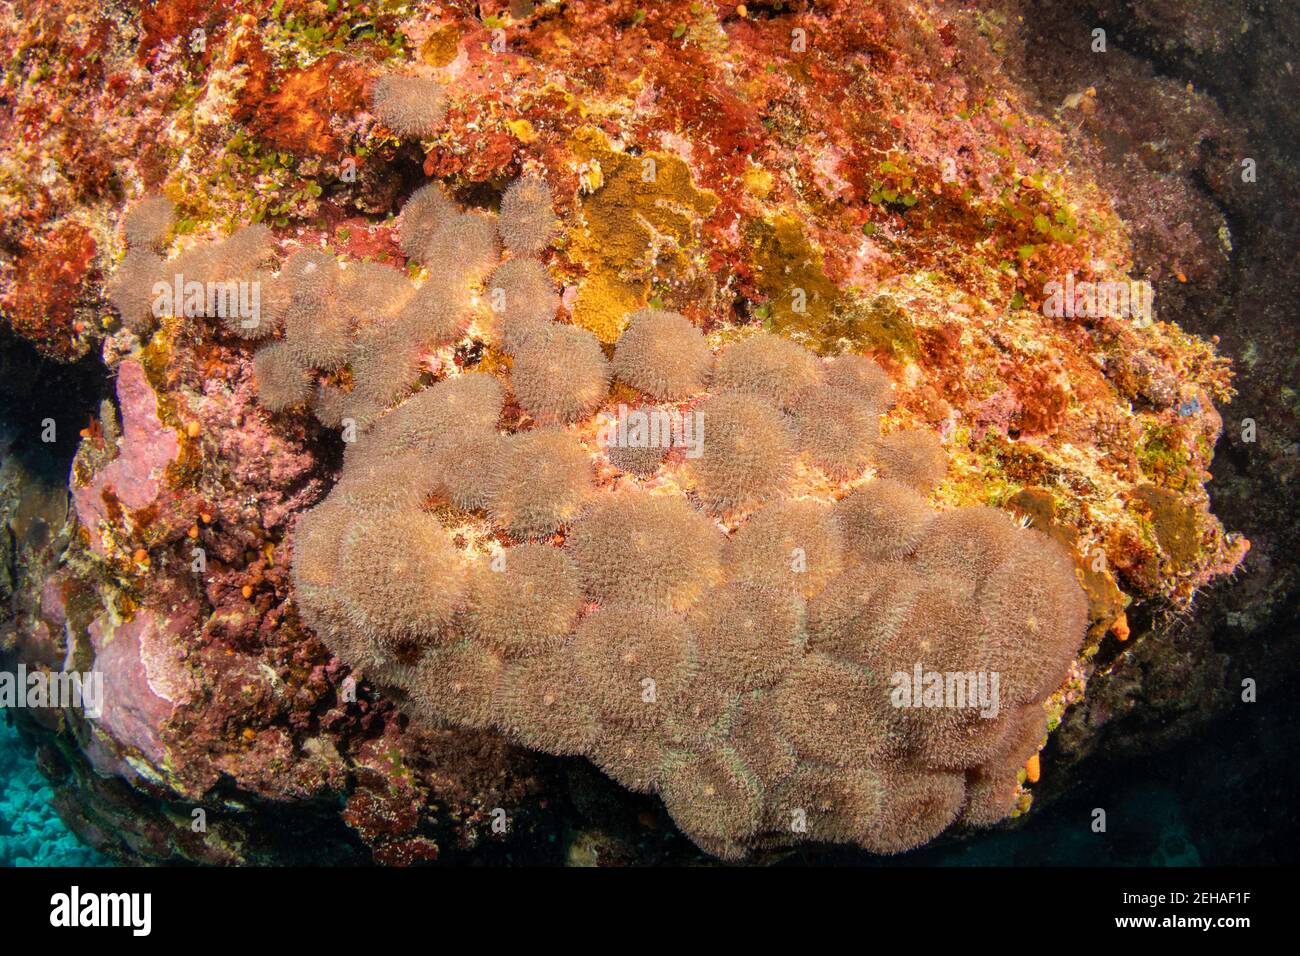 Corallimorphs or disc anemones, Rhodactis rhodostoma, live in colonies, possess symbiotic algae and are sustained mainly on their products. They are a Stock Photo